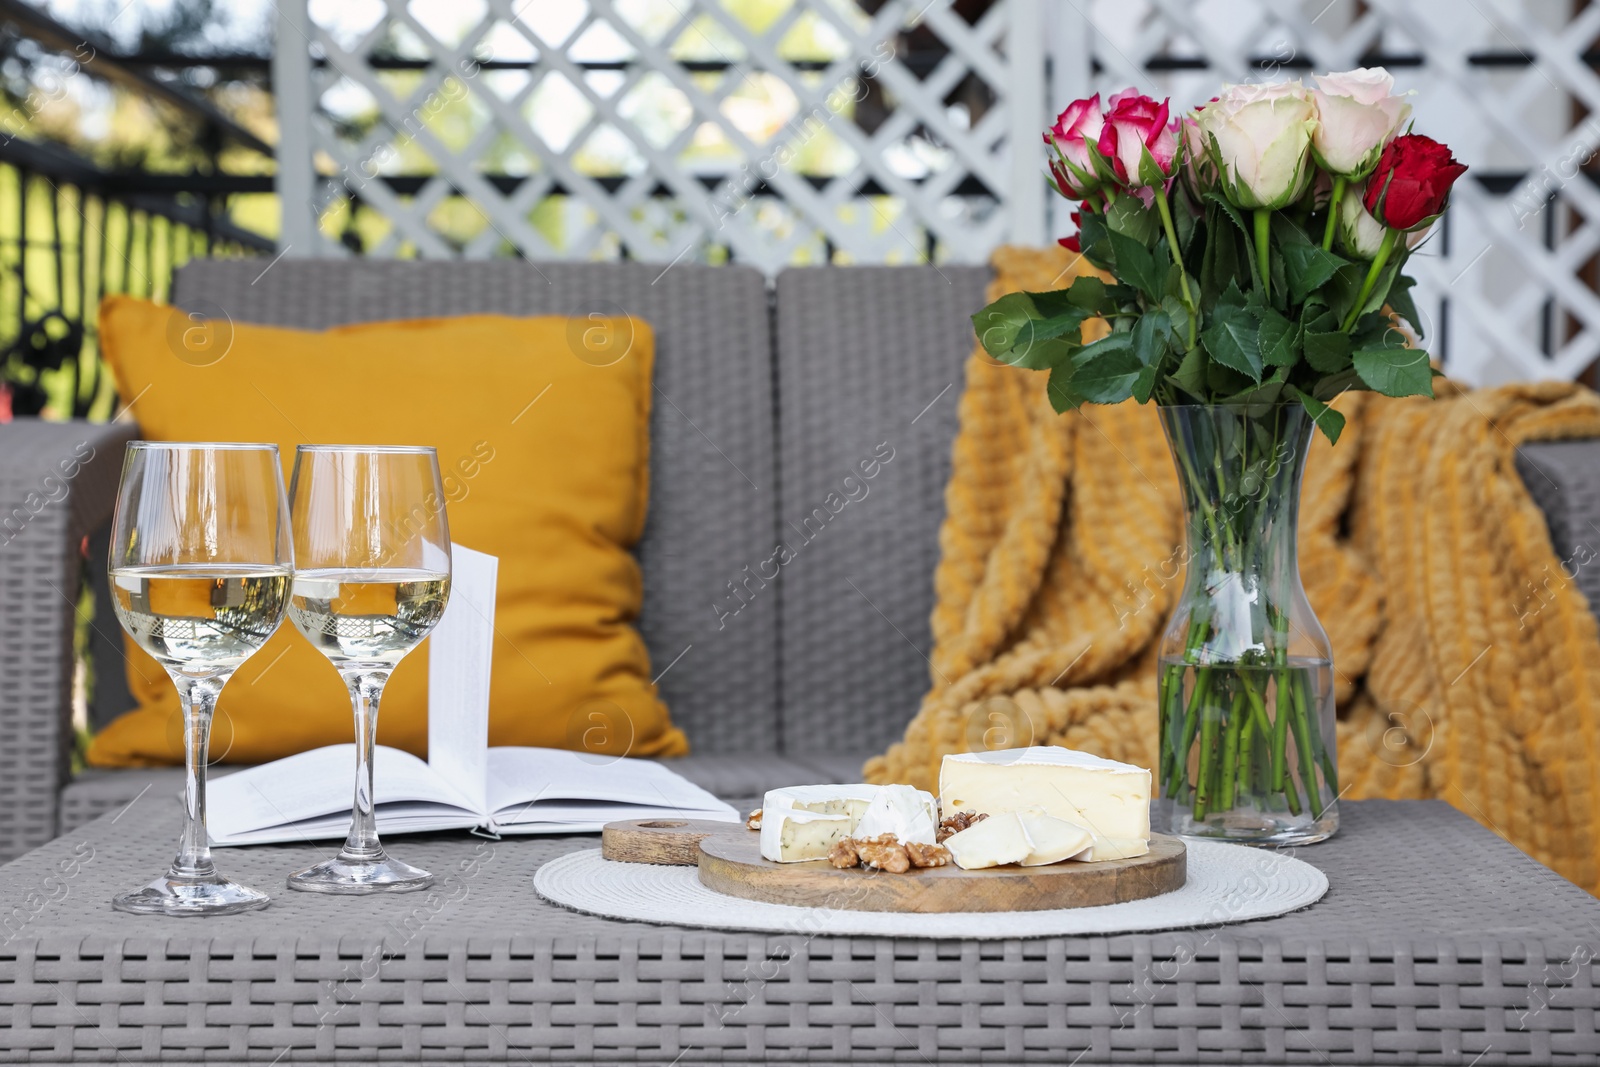 Photo of Vase with roses, open book, glasses of wine and snacks on rattan table at balcony